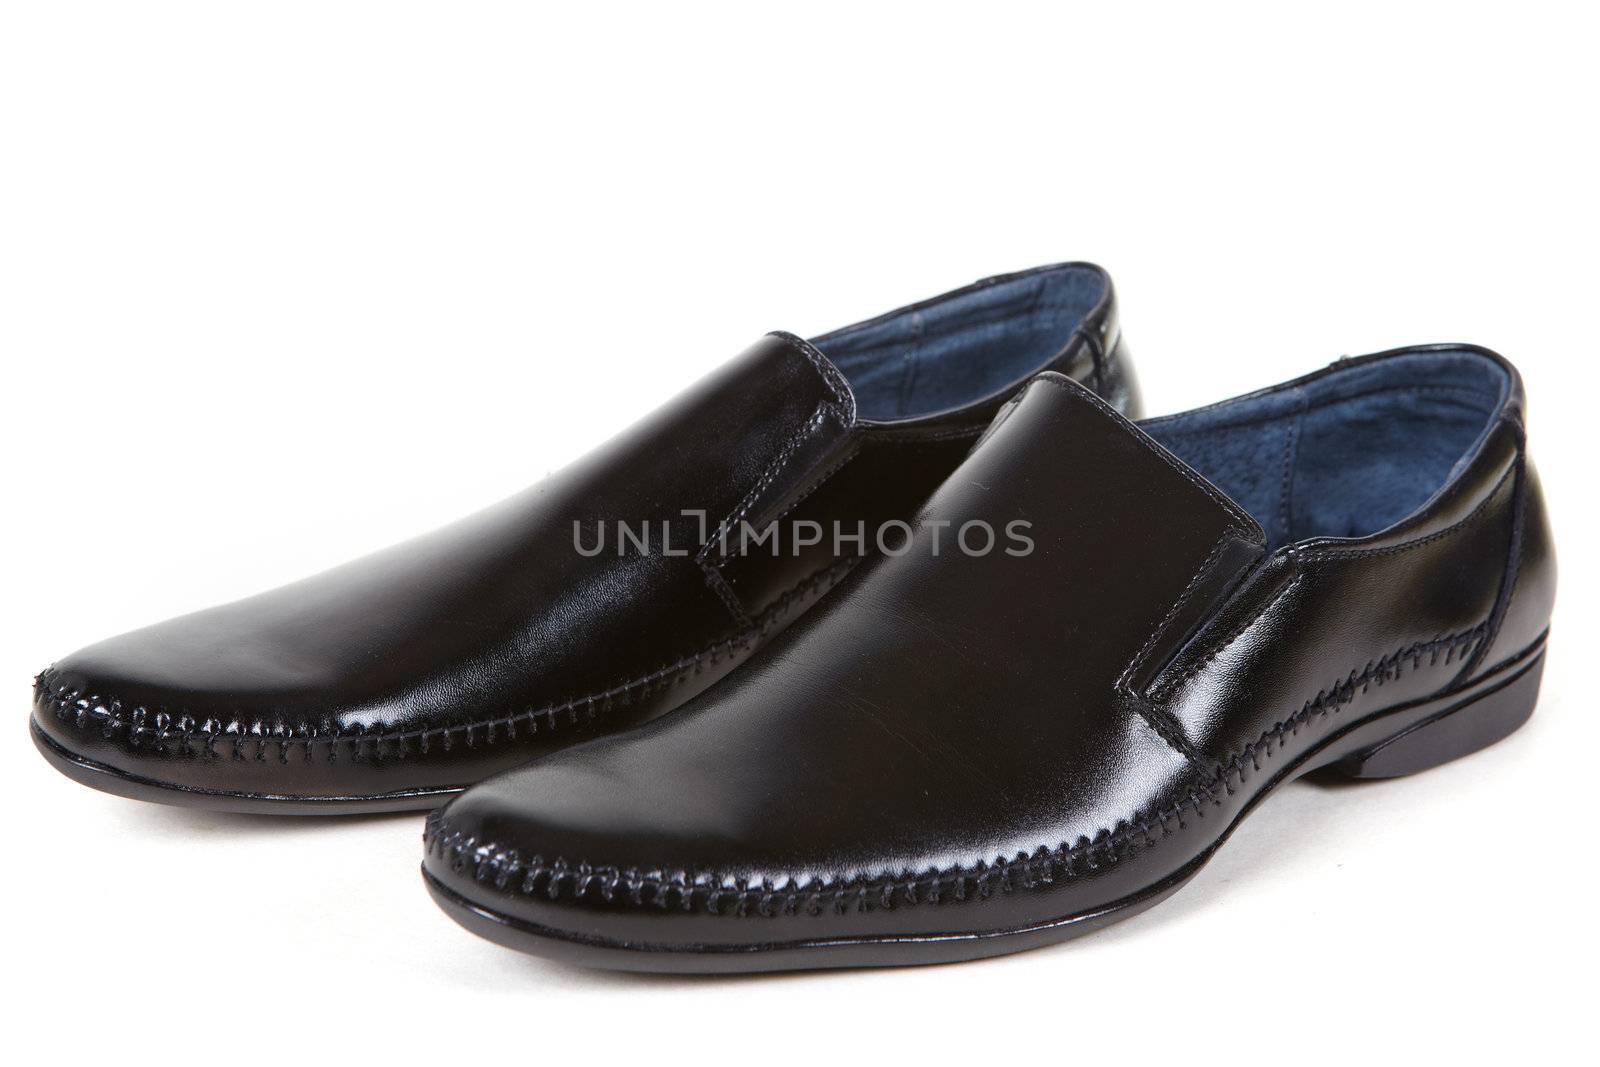 Black man shoes on a white background